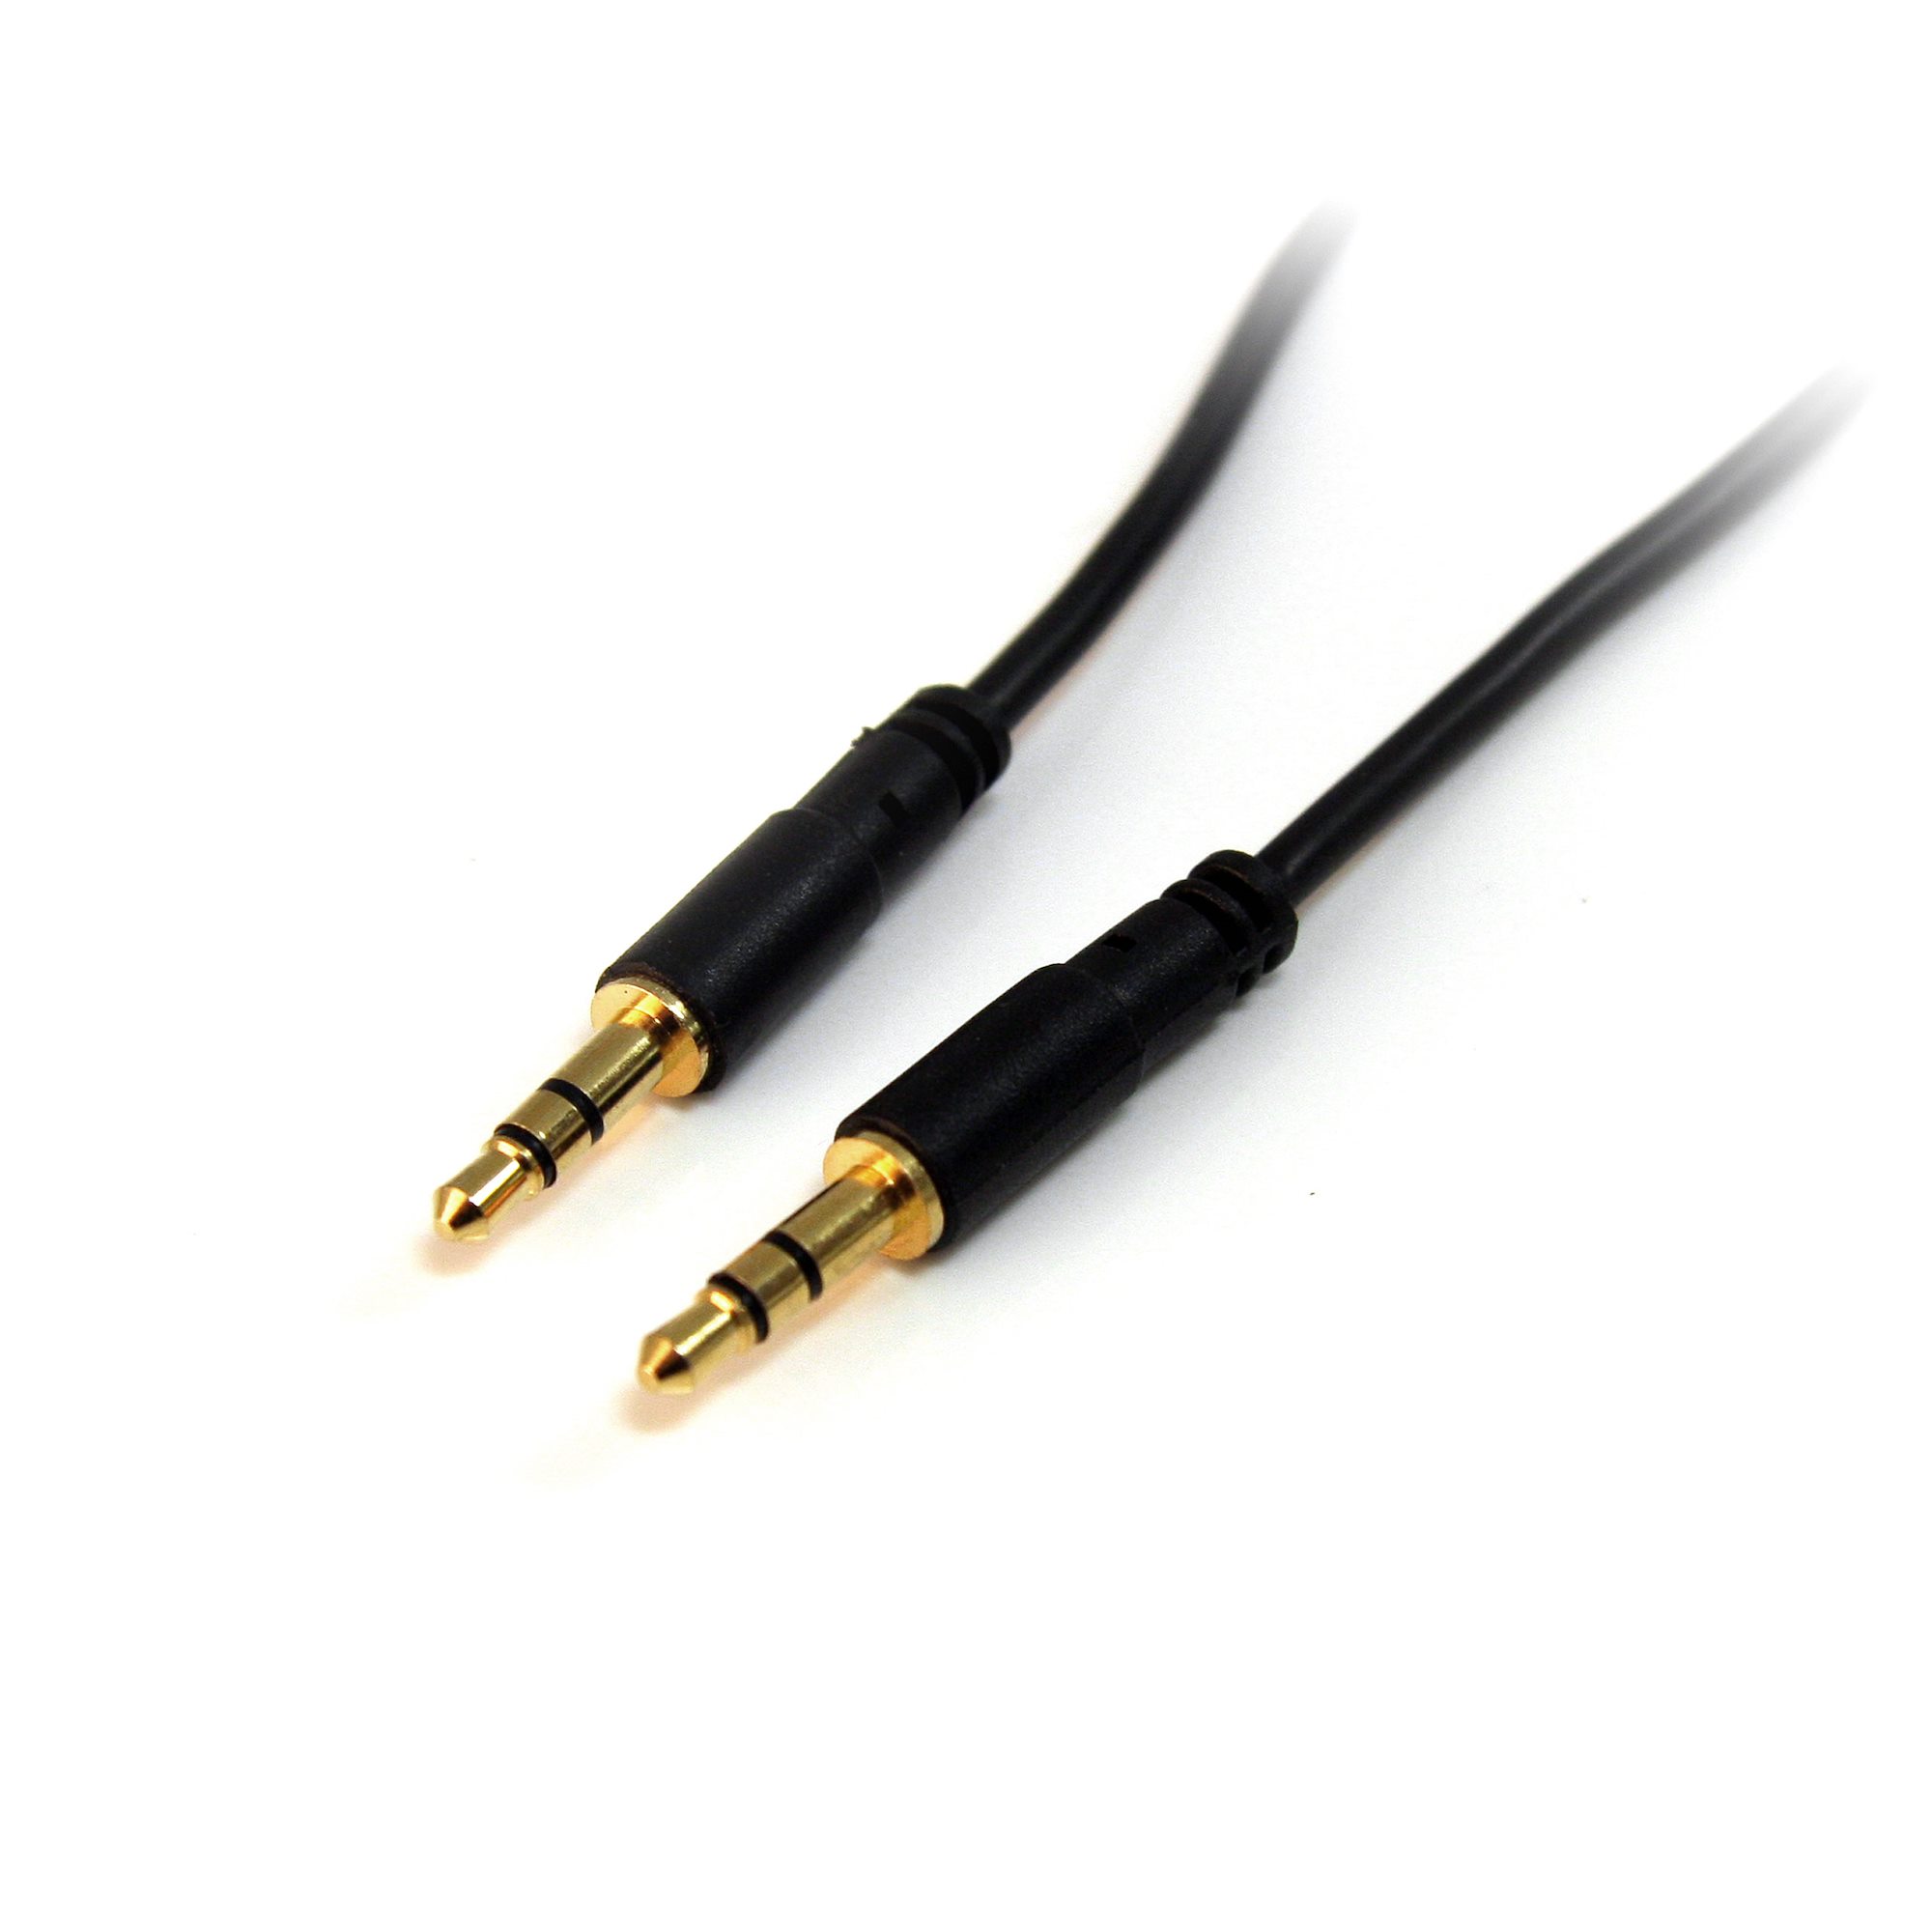 Auto Drive Lightning to 3.5 mm Plug Stereo Aux Cable, 3 ft Audio Cord, Mfi  Certified,Black